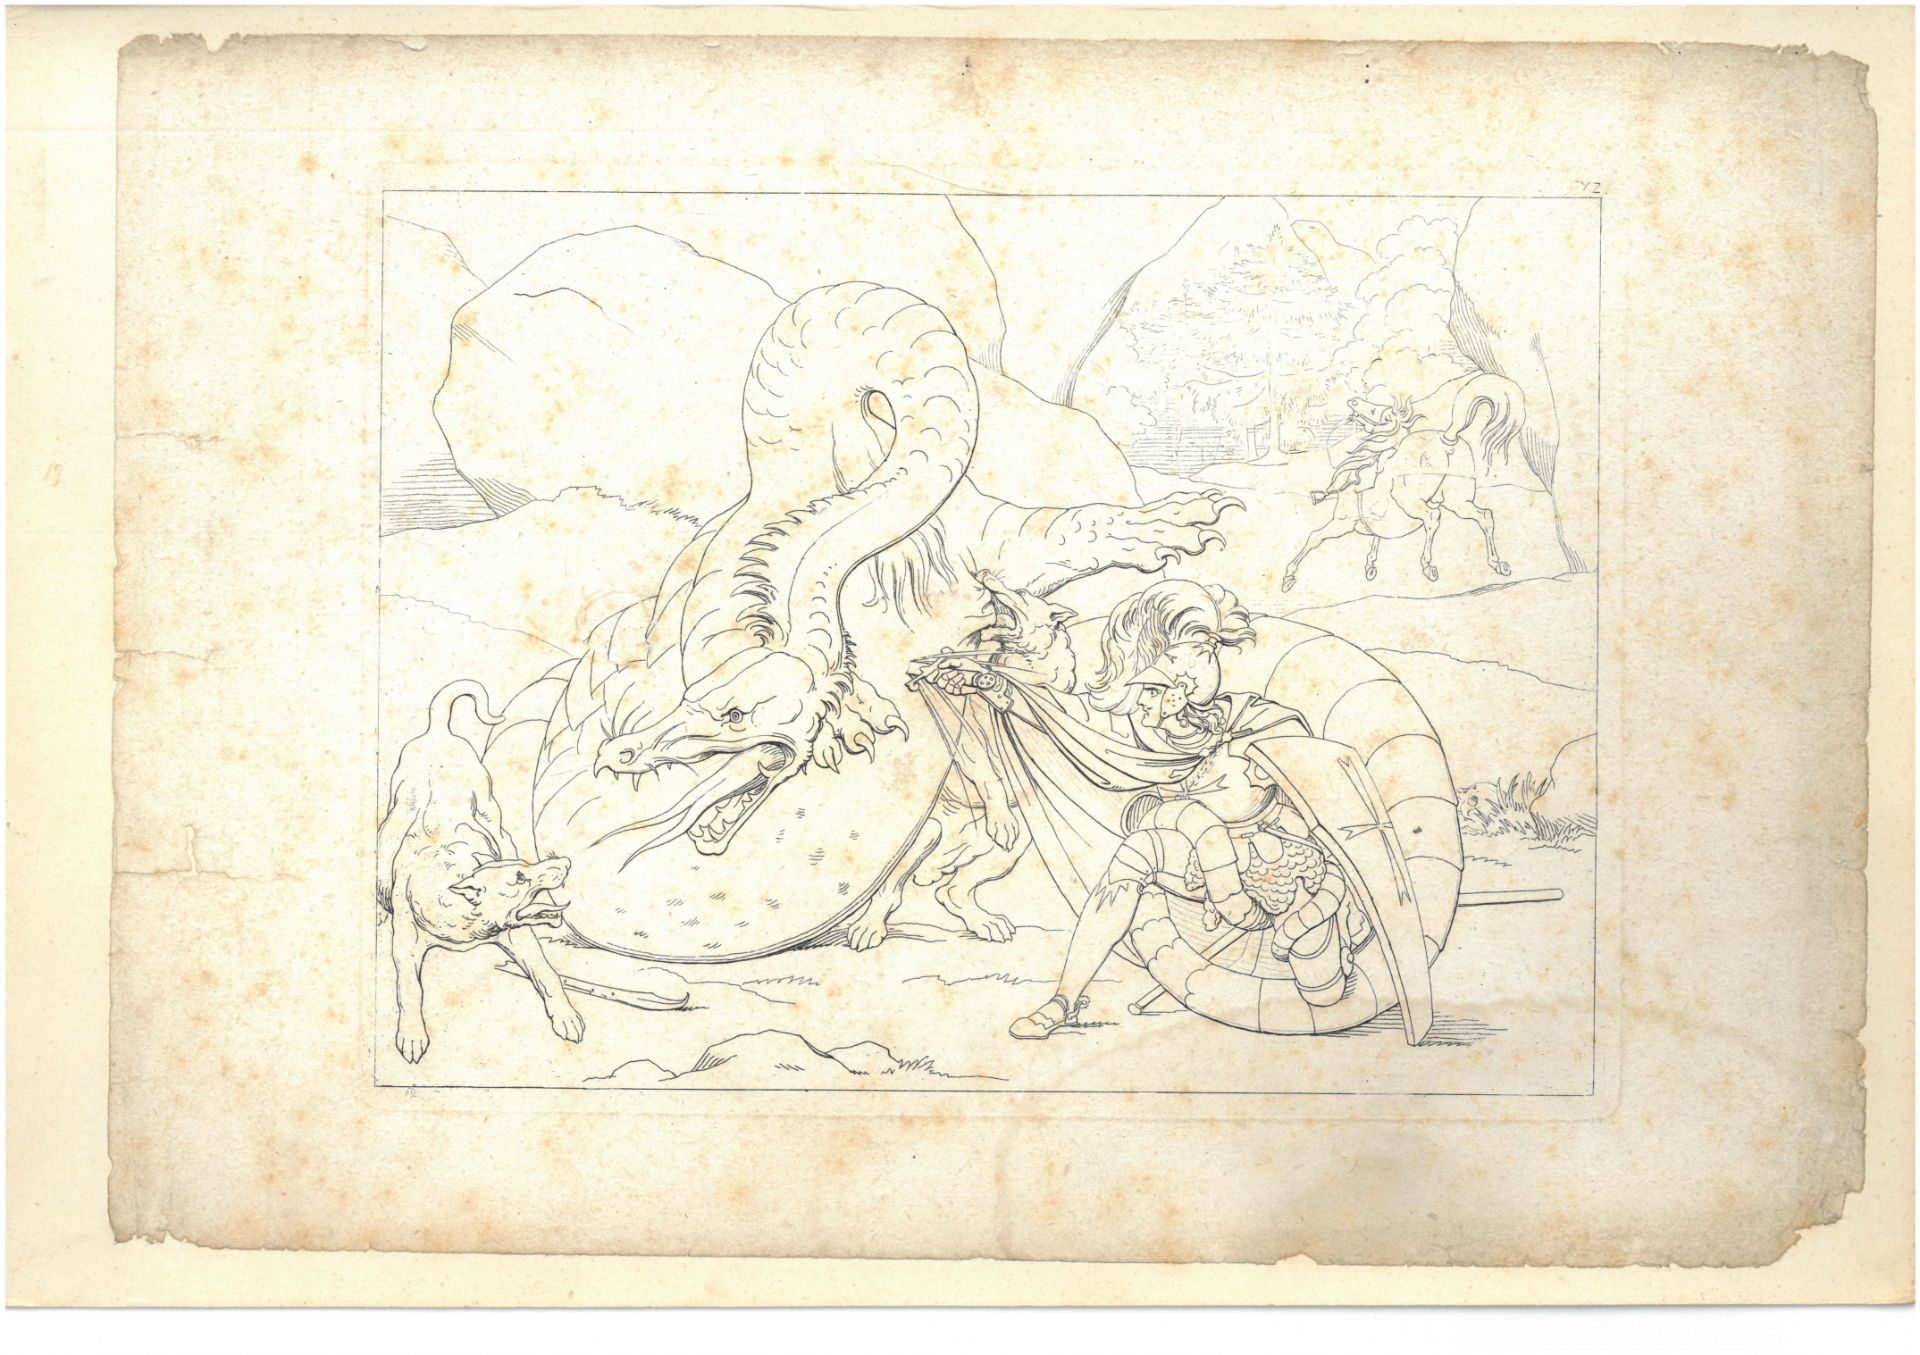 A portfolio of black and white illustration plates depicting the story of "Bolla" (possibly)  the - Image 13 of 18